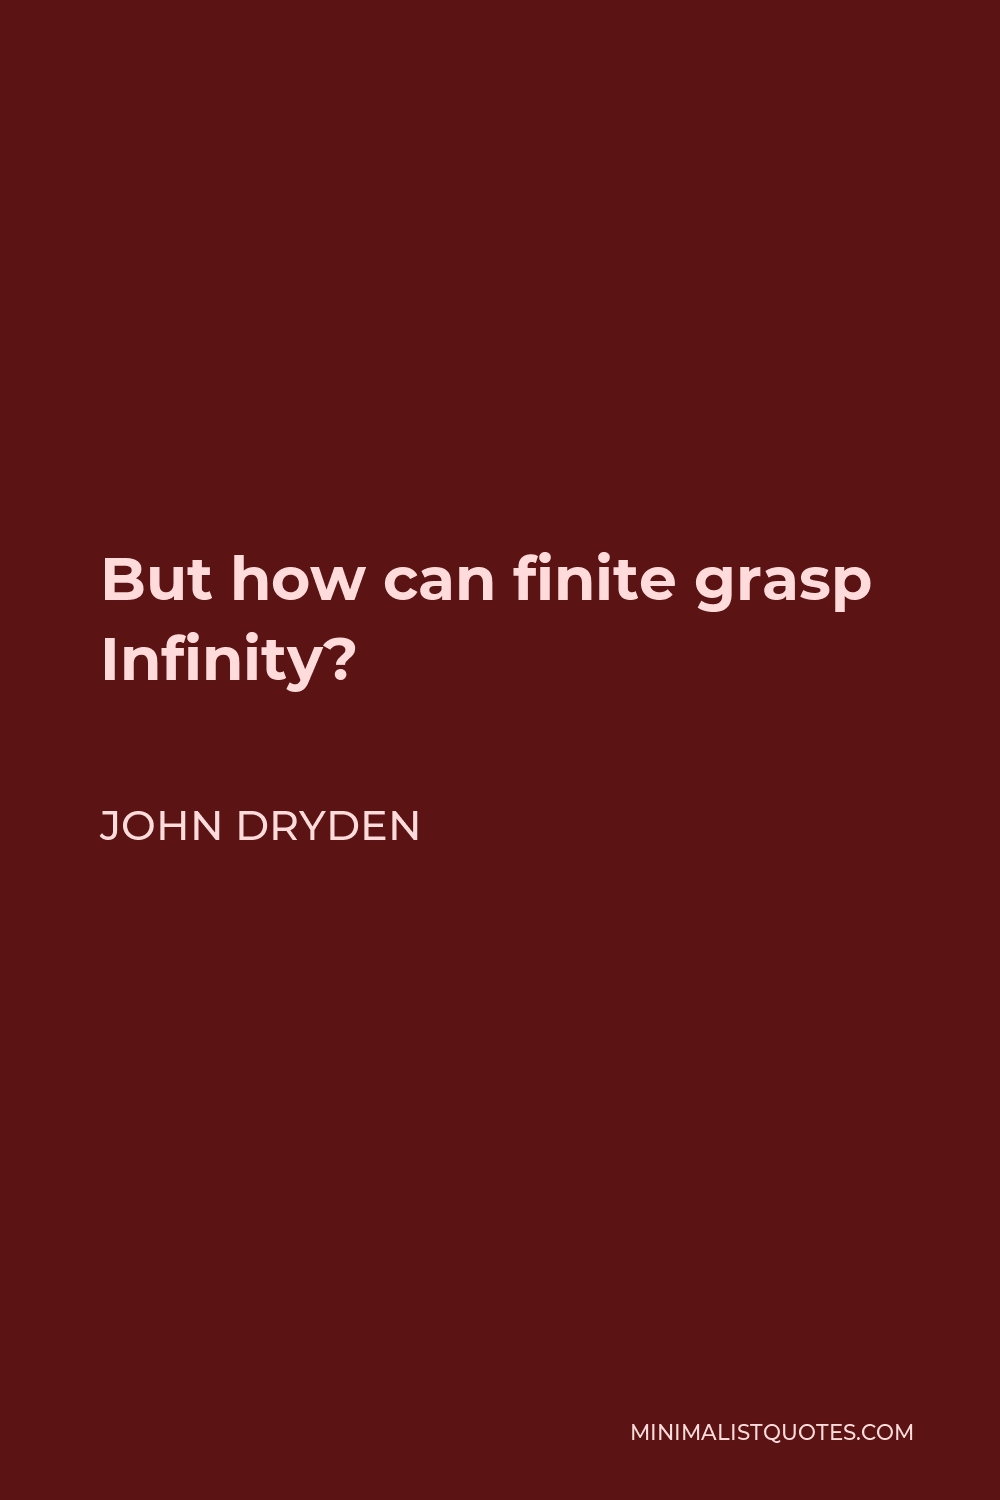 John Dryden Quote - But how can finite grasp Infinity?